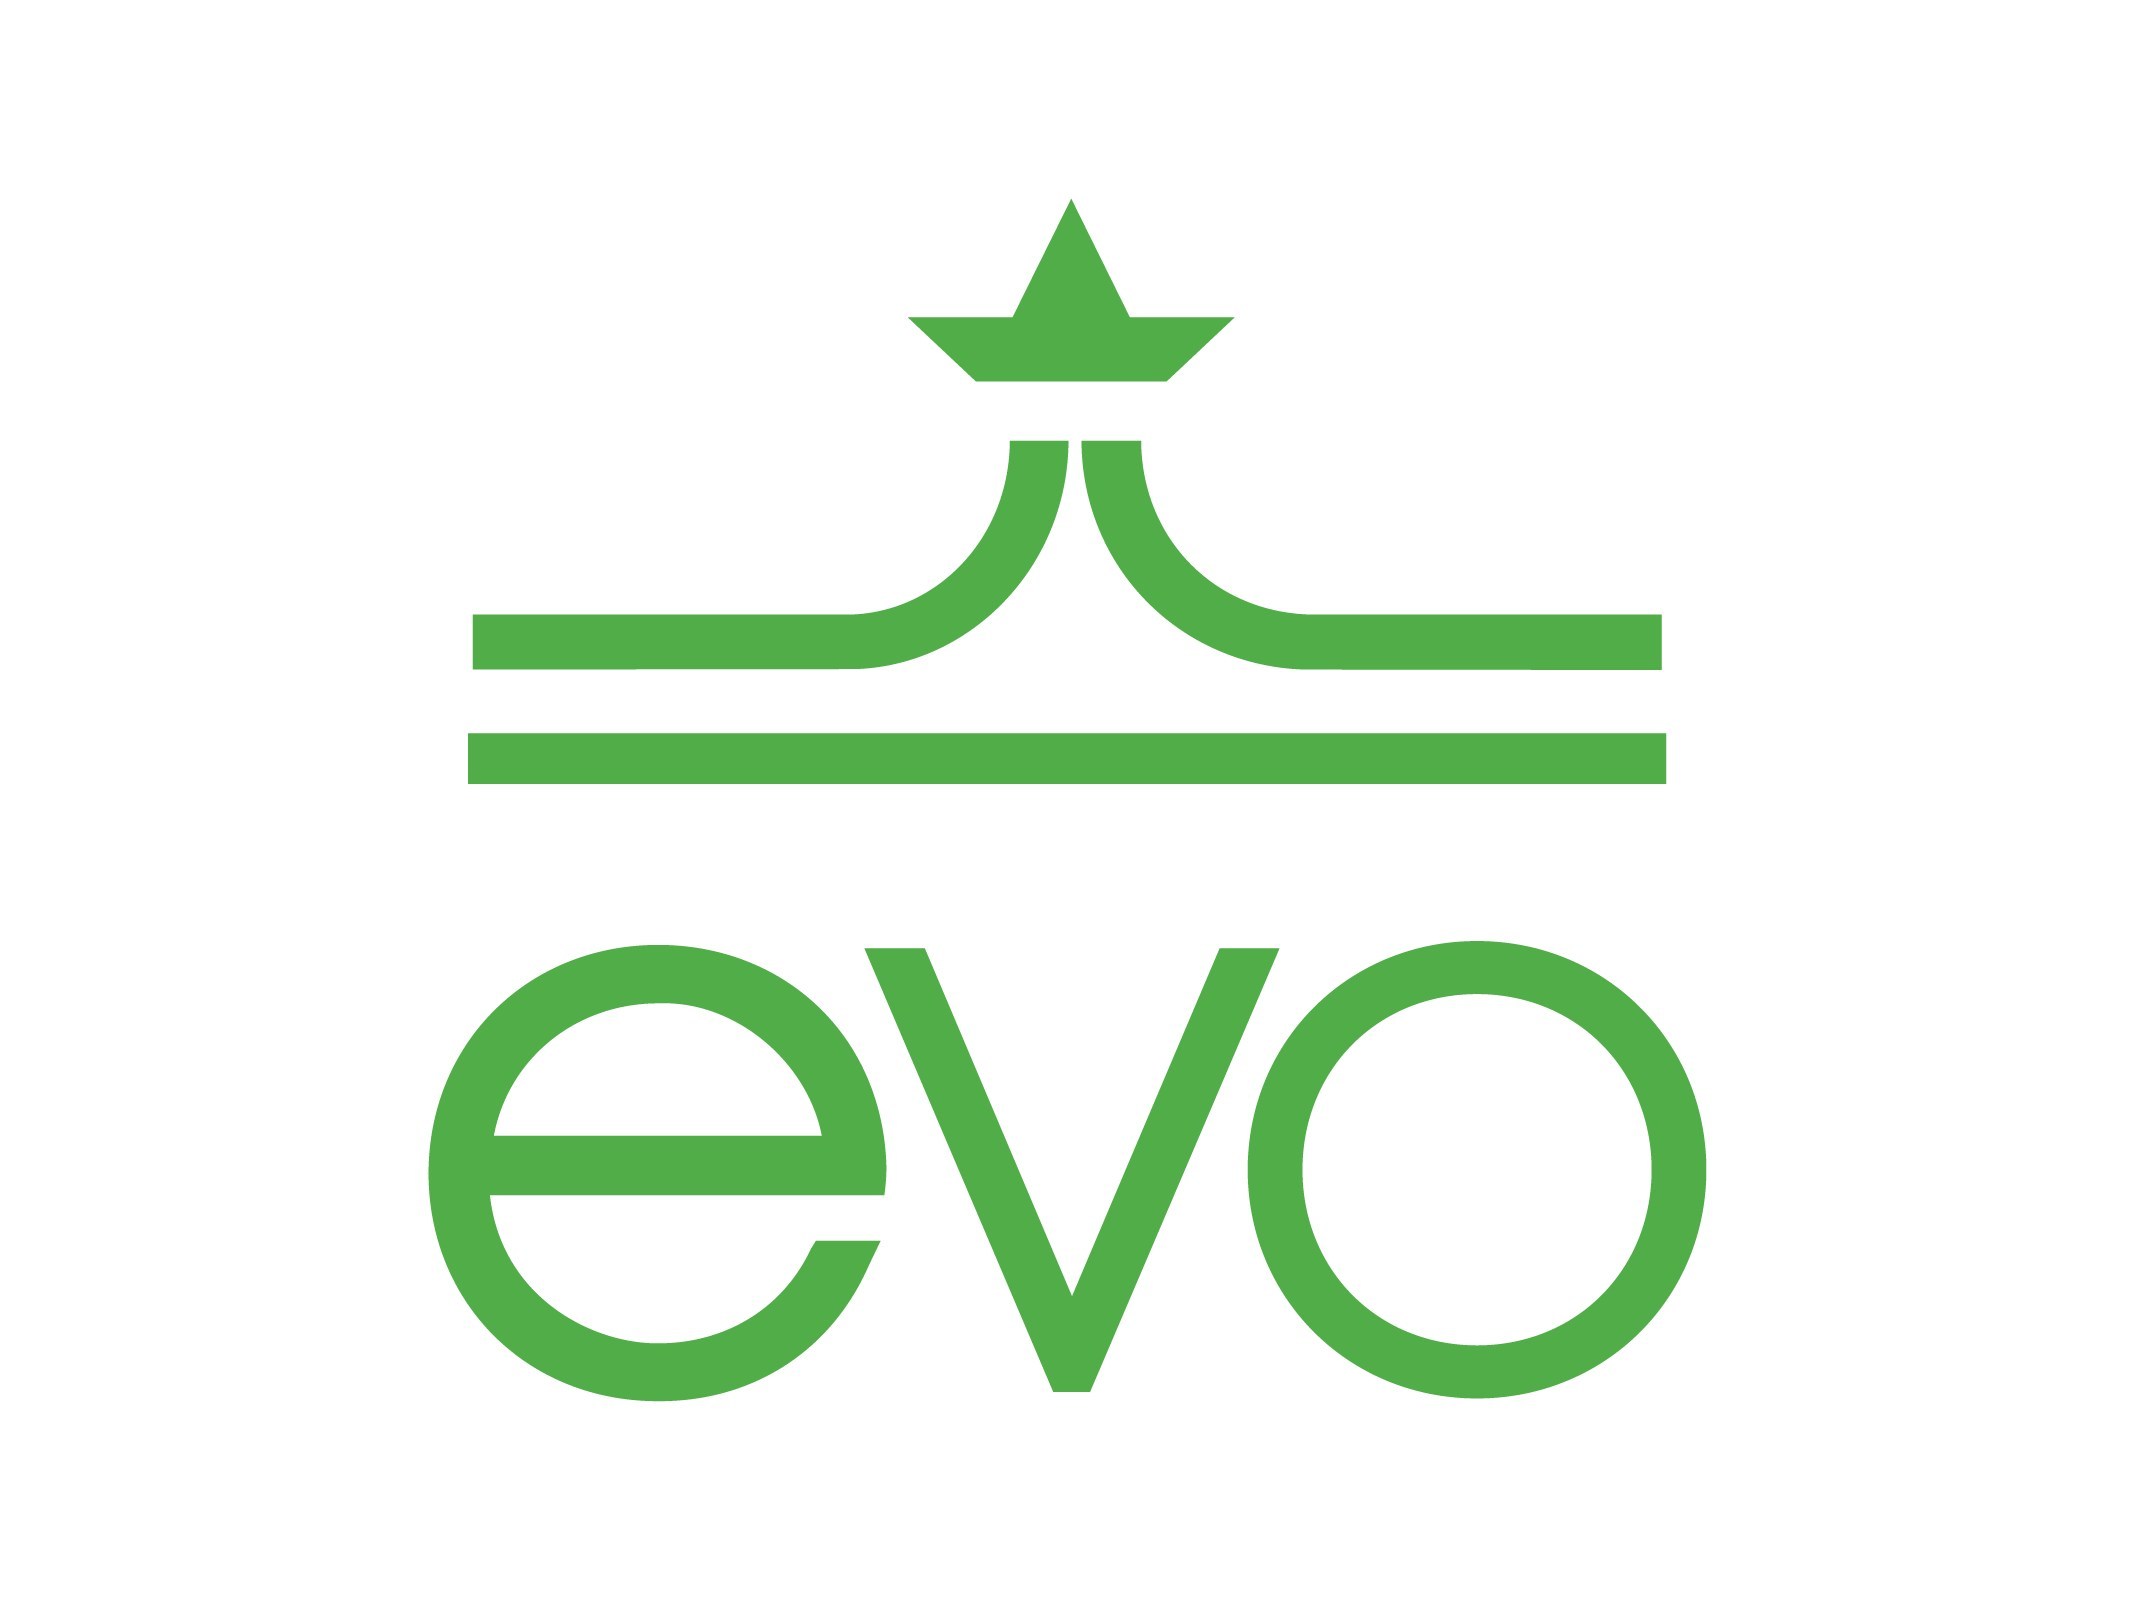 evo Announces New Campus Location in Tahoe Coming in 2023